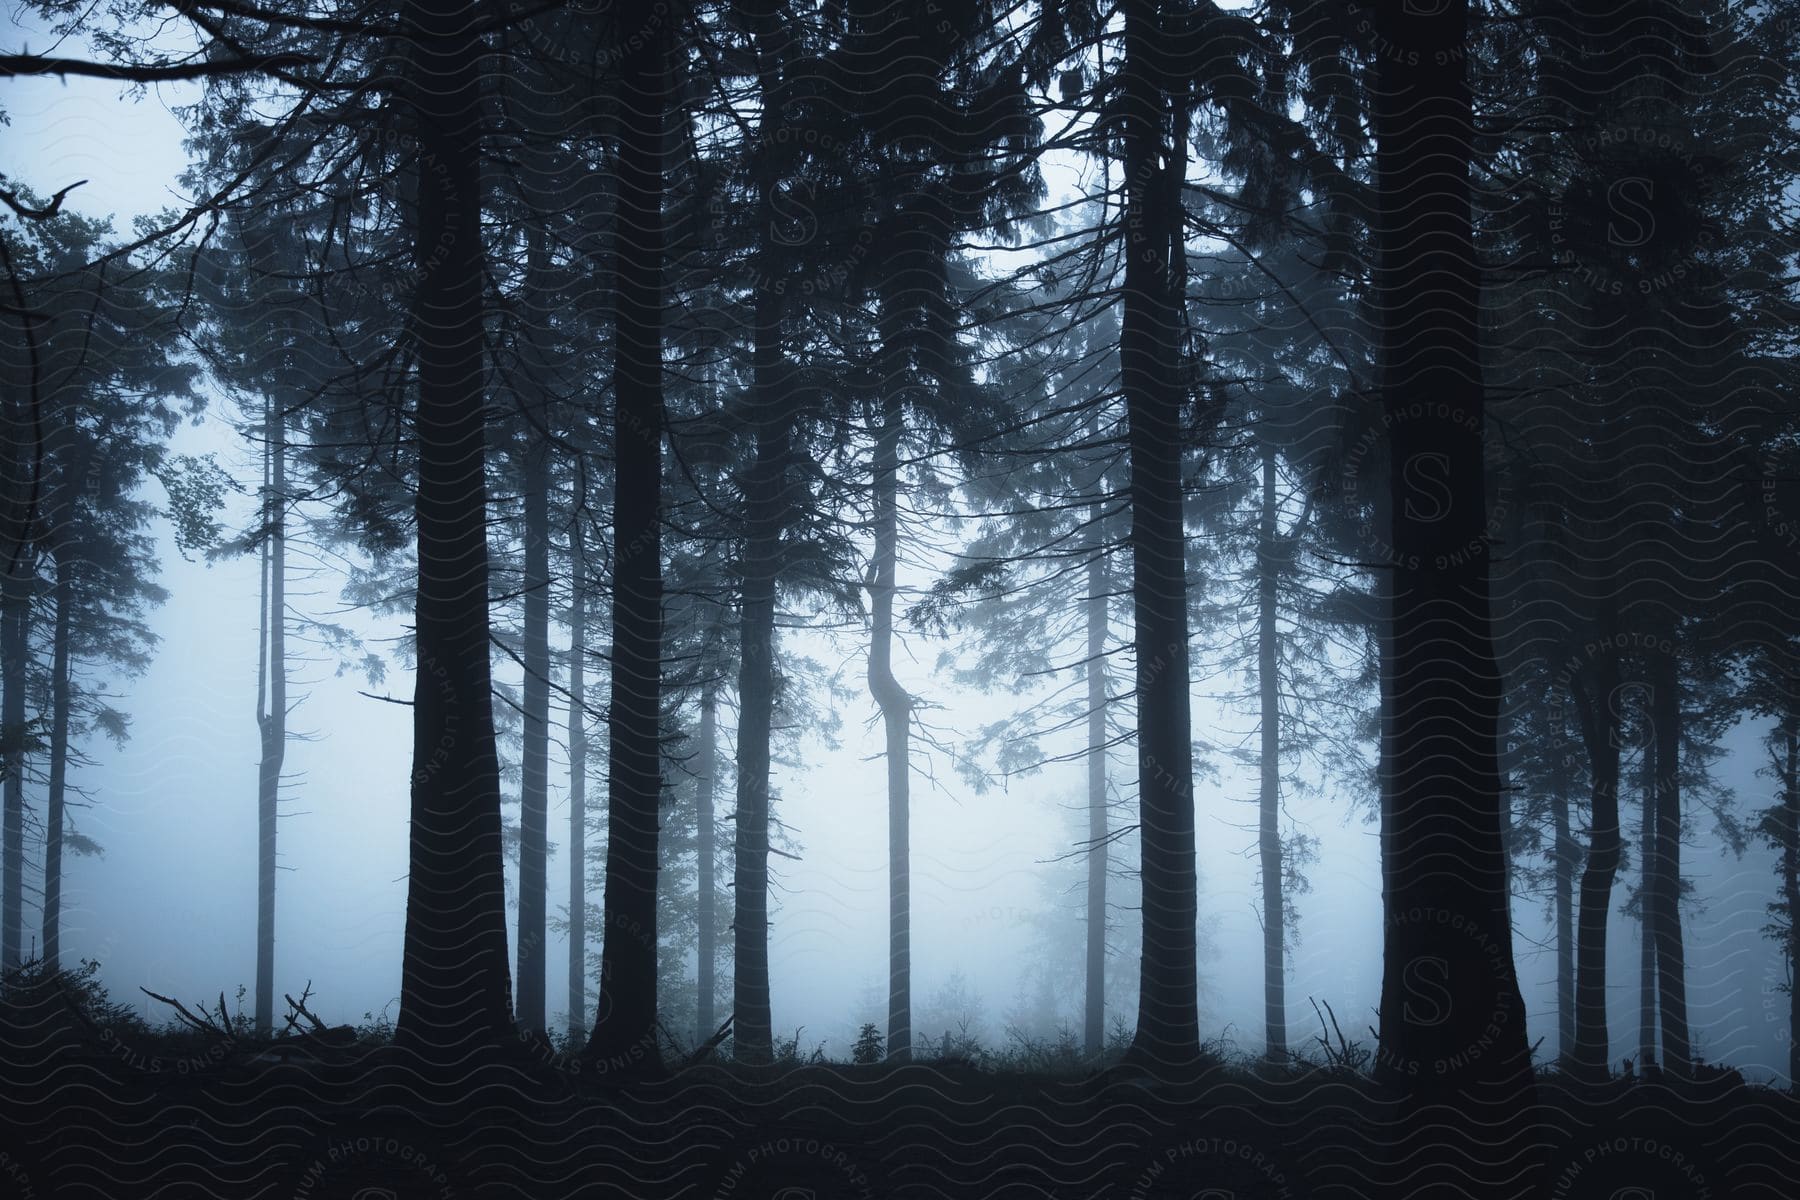 Daylight shines through tall trees in a foggy forest